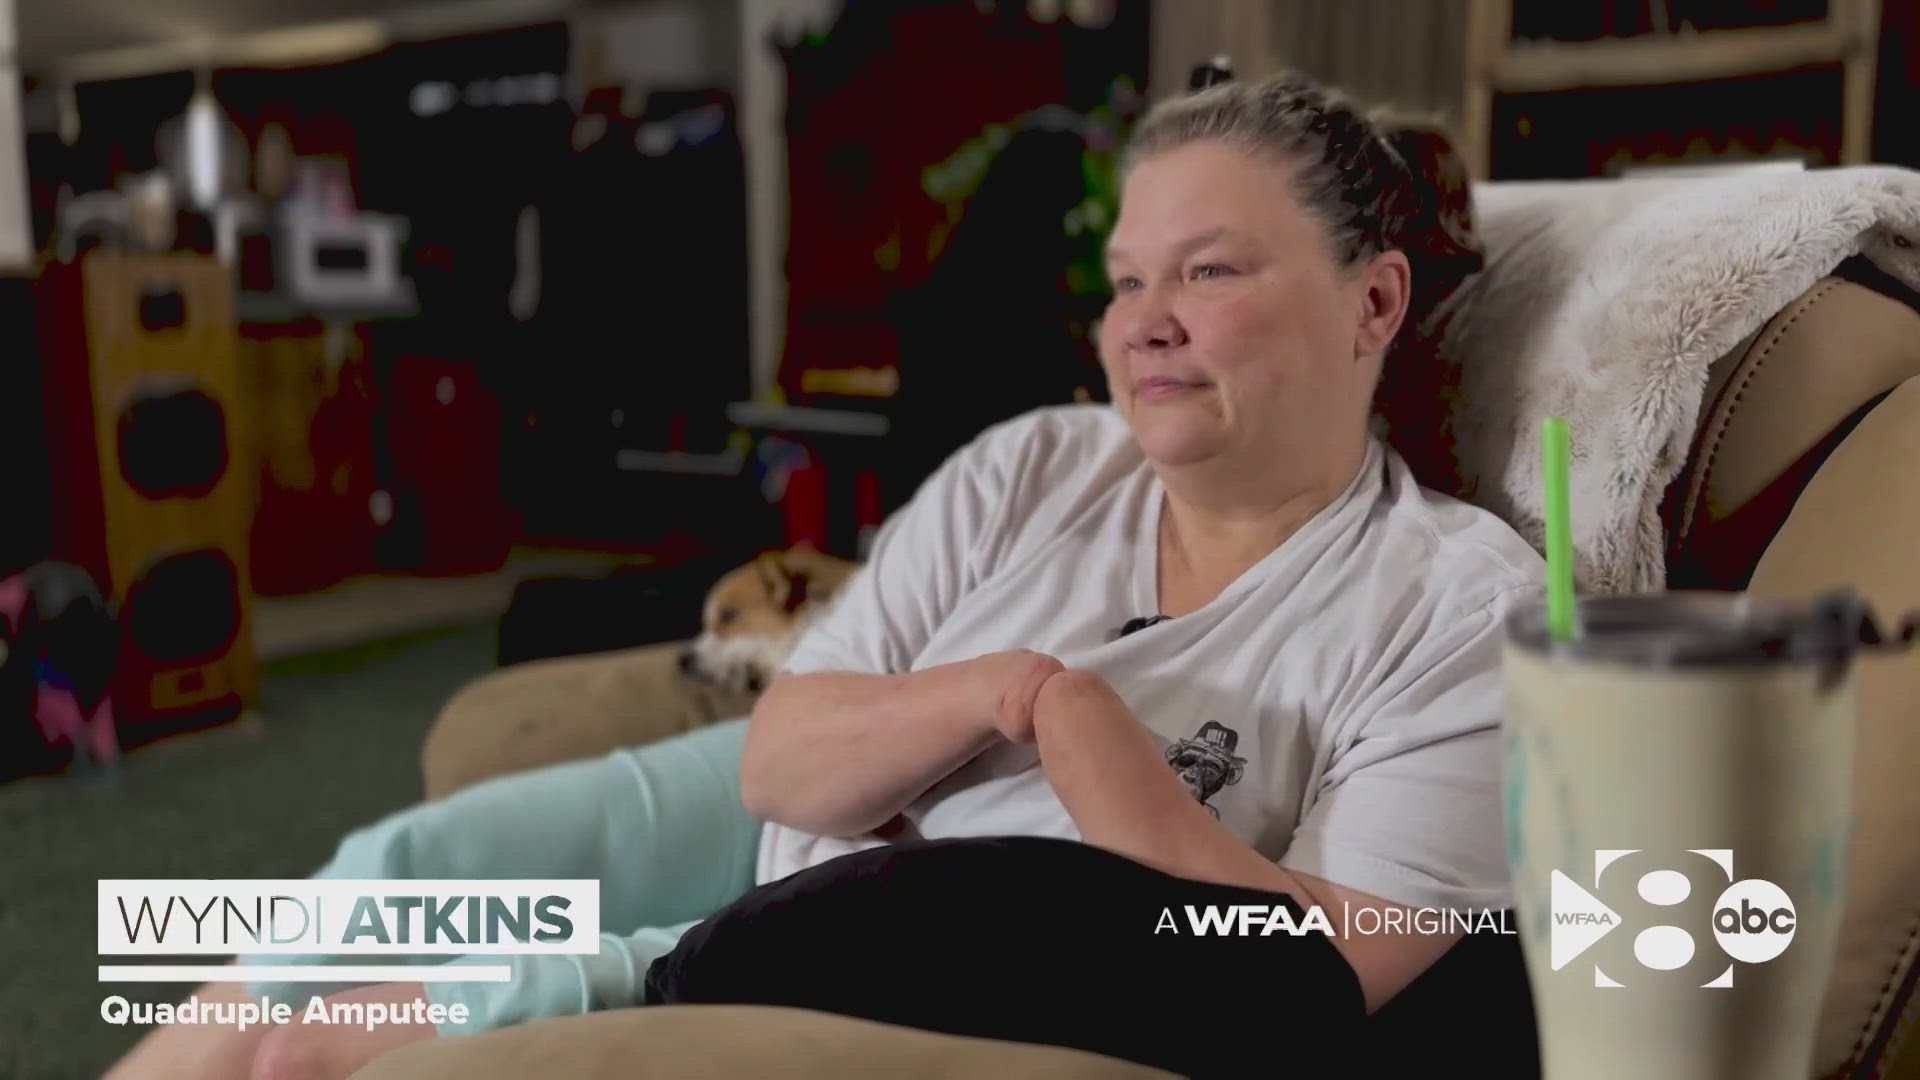 Wyndi Atkins lost both hands and feet to a strep infection. She needs help to get the 'bionic' hands she says her insurance will not approve.